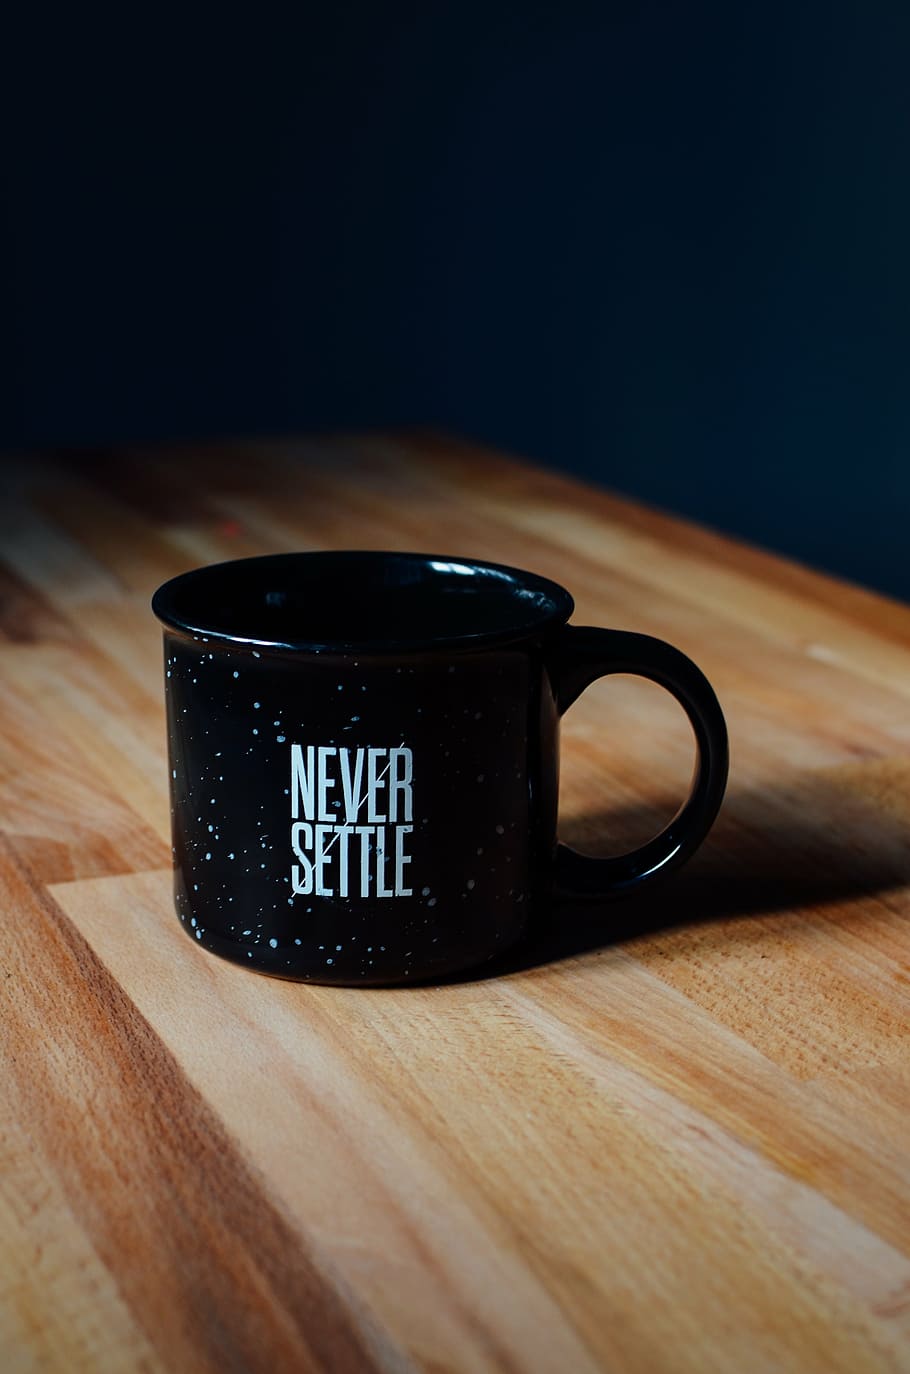 black, never, settle, ceramic, mug, brown, wooden, table, quote, statement